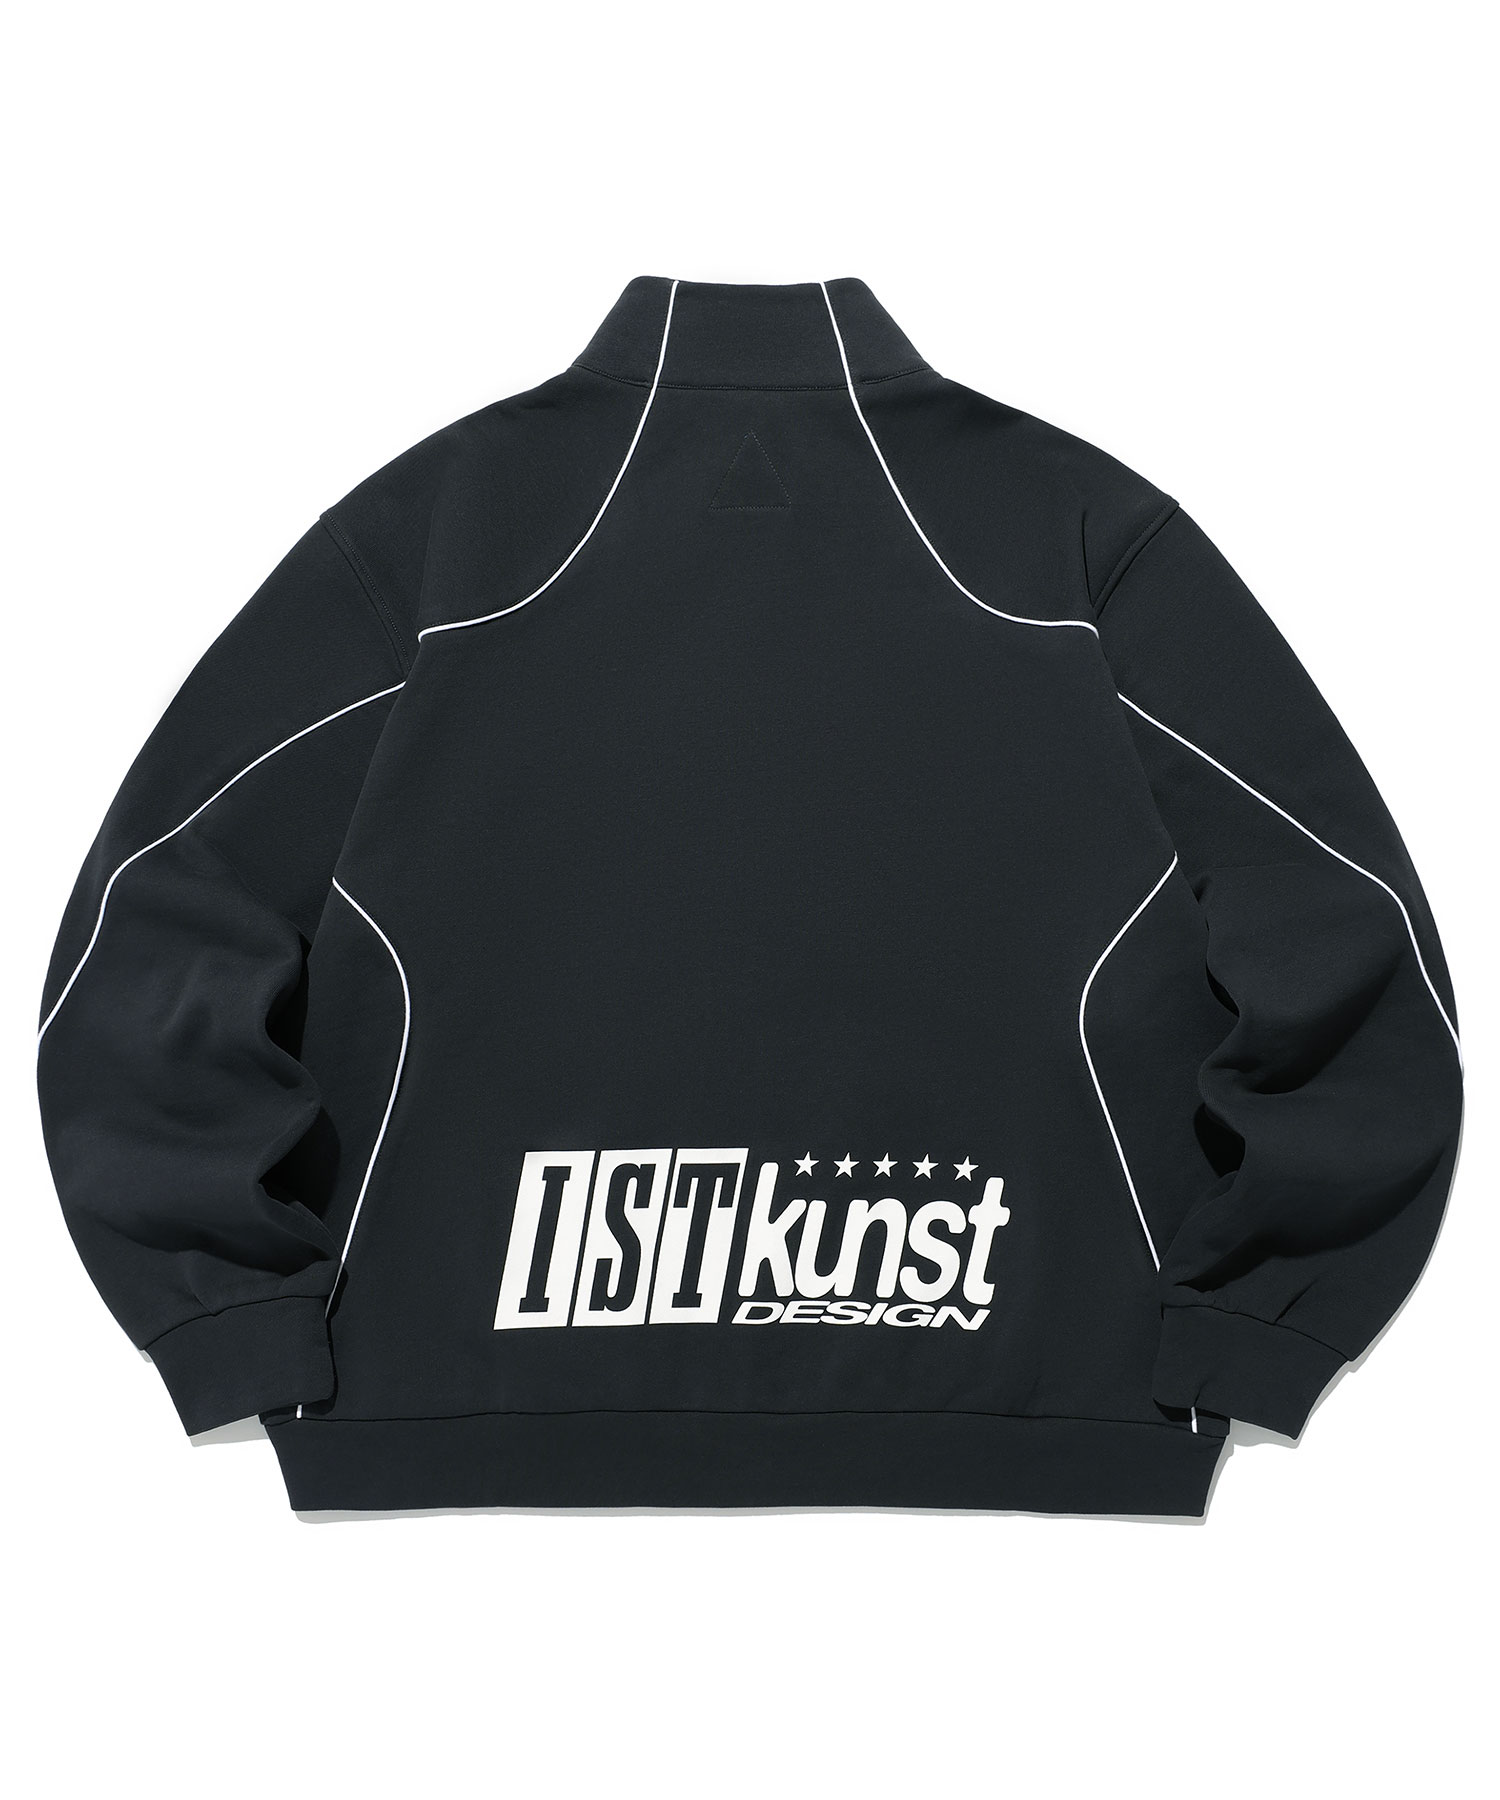 JERSEY PIPING TRACK JACKET[BLACK]